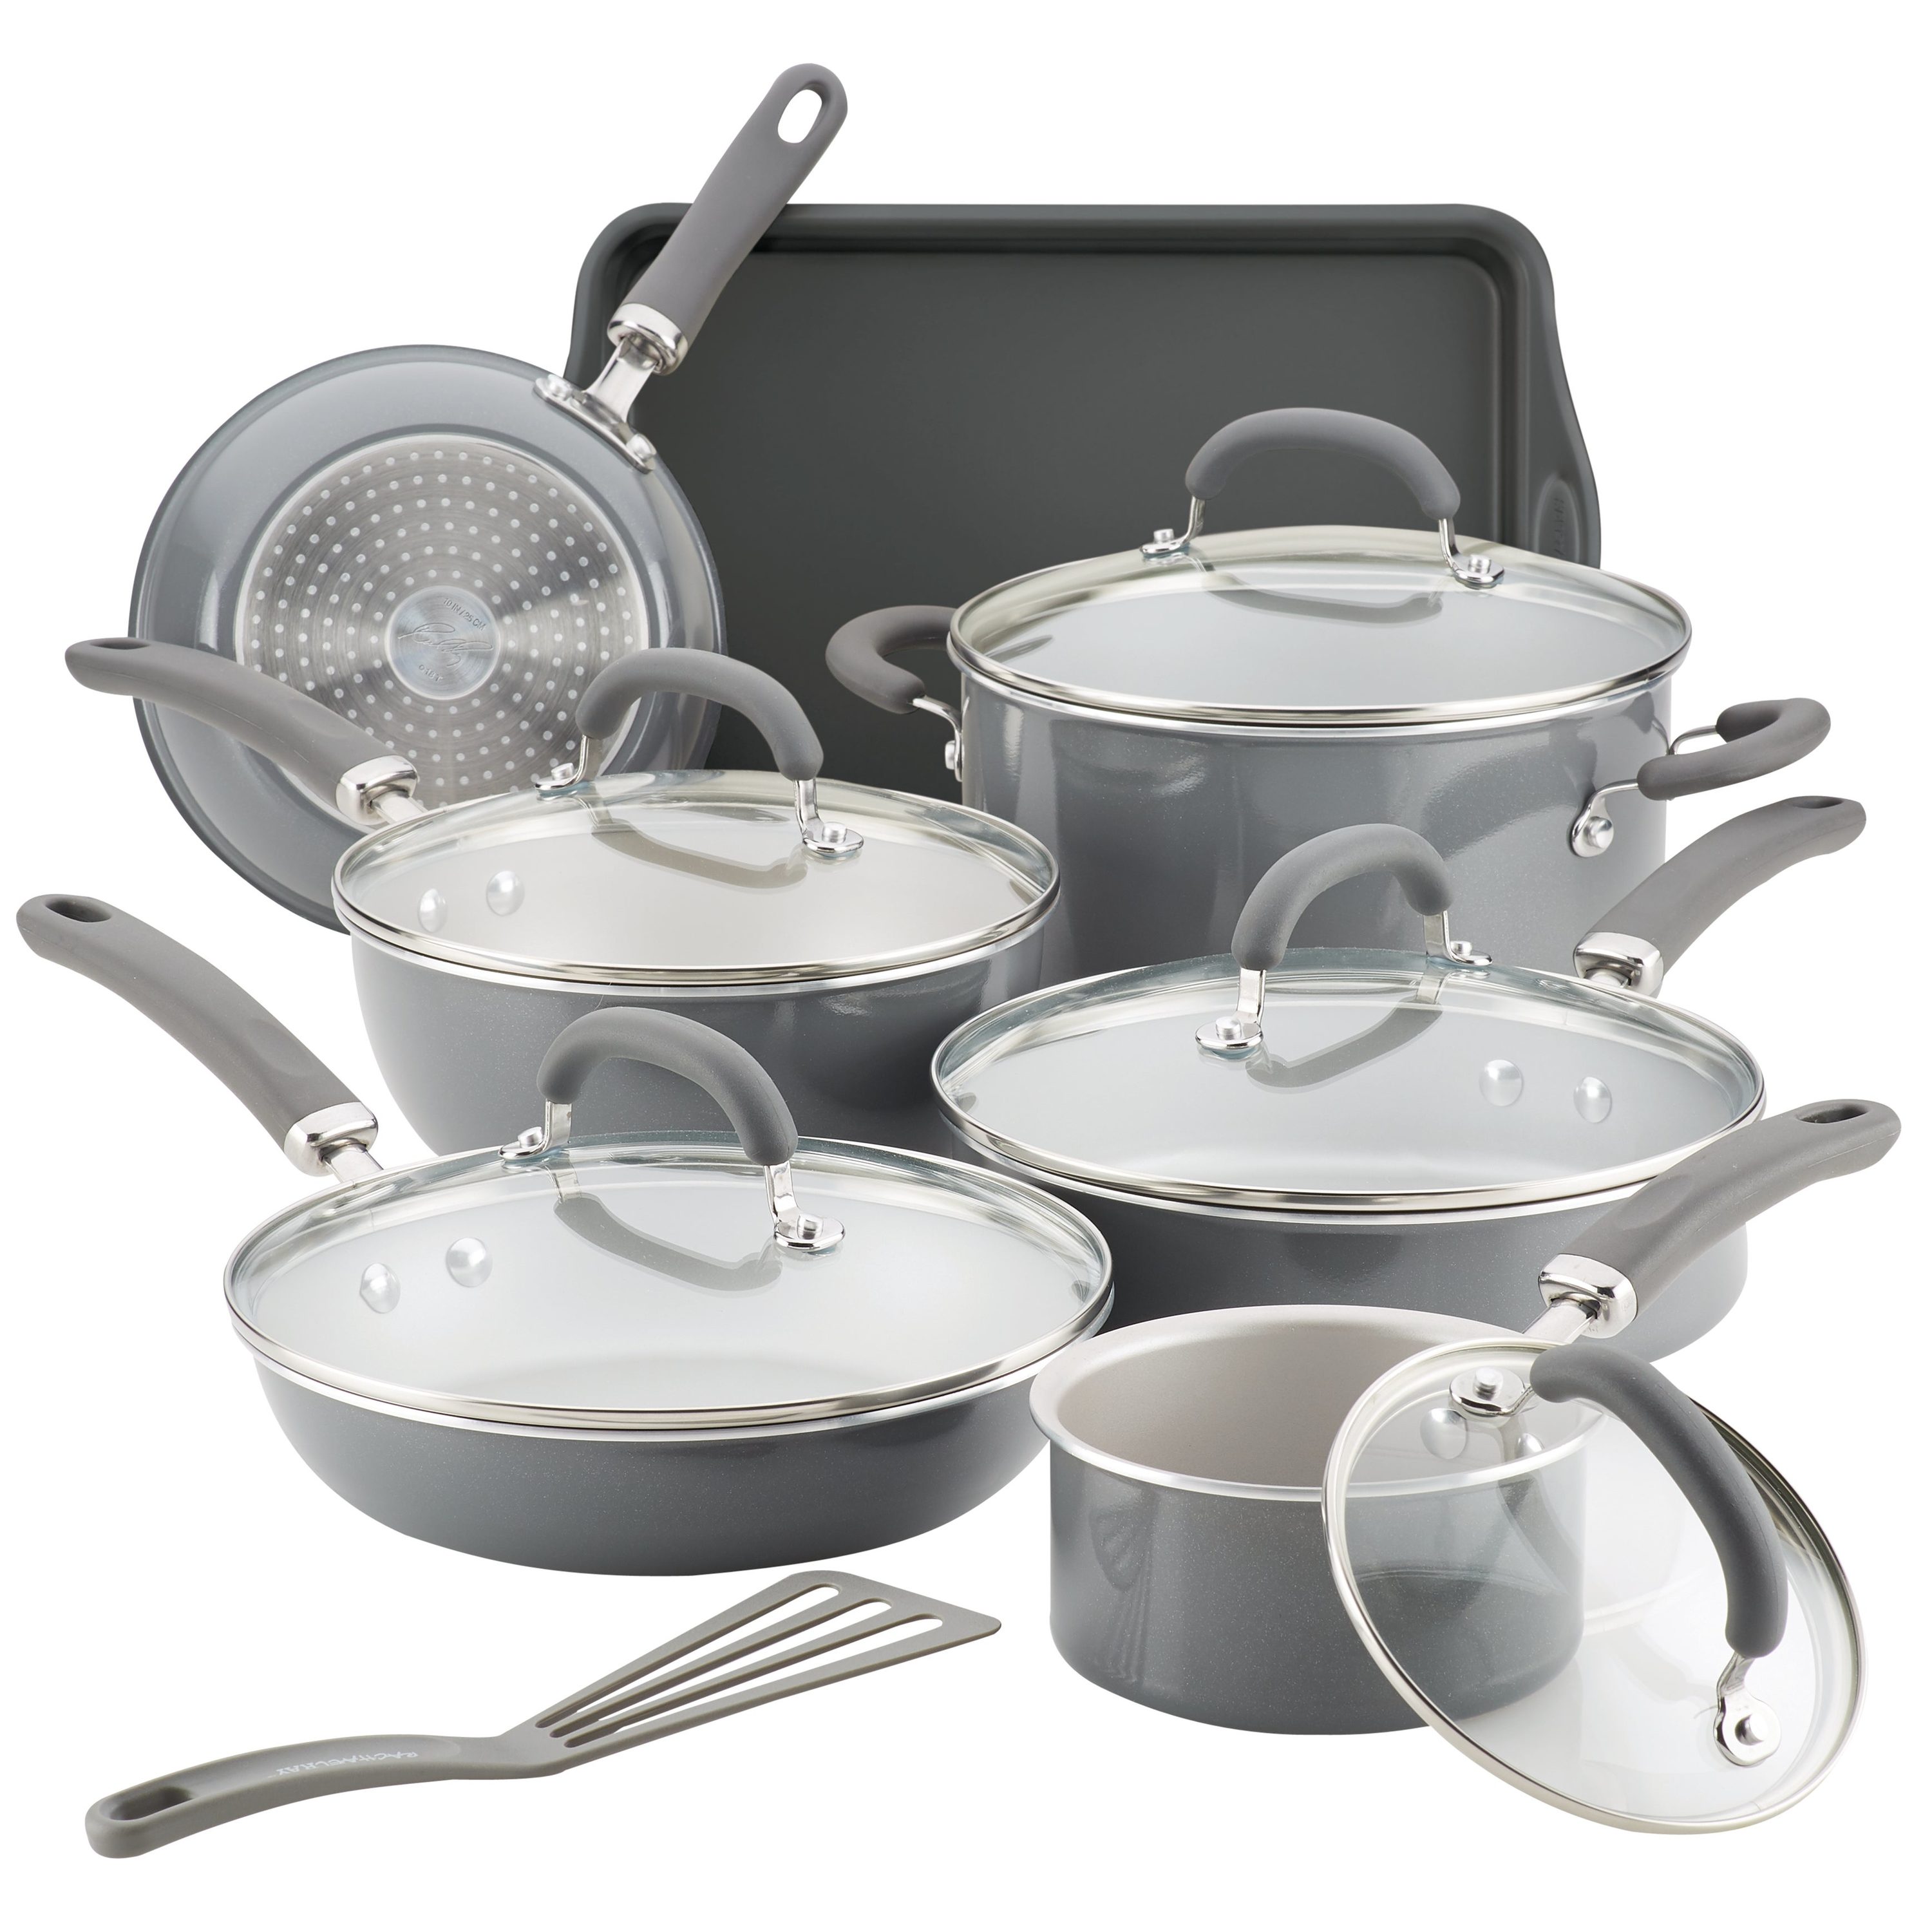 Rachael Ray 14-Piece Set Hard Anodized Cookware Set review - Reviewed